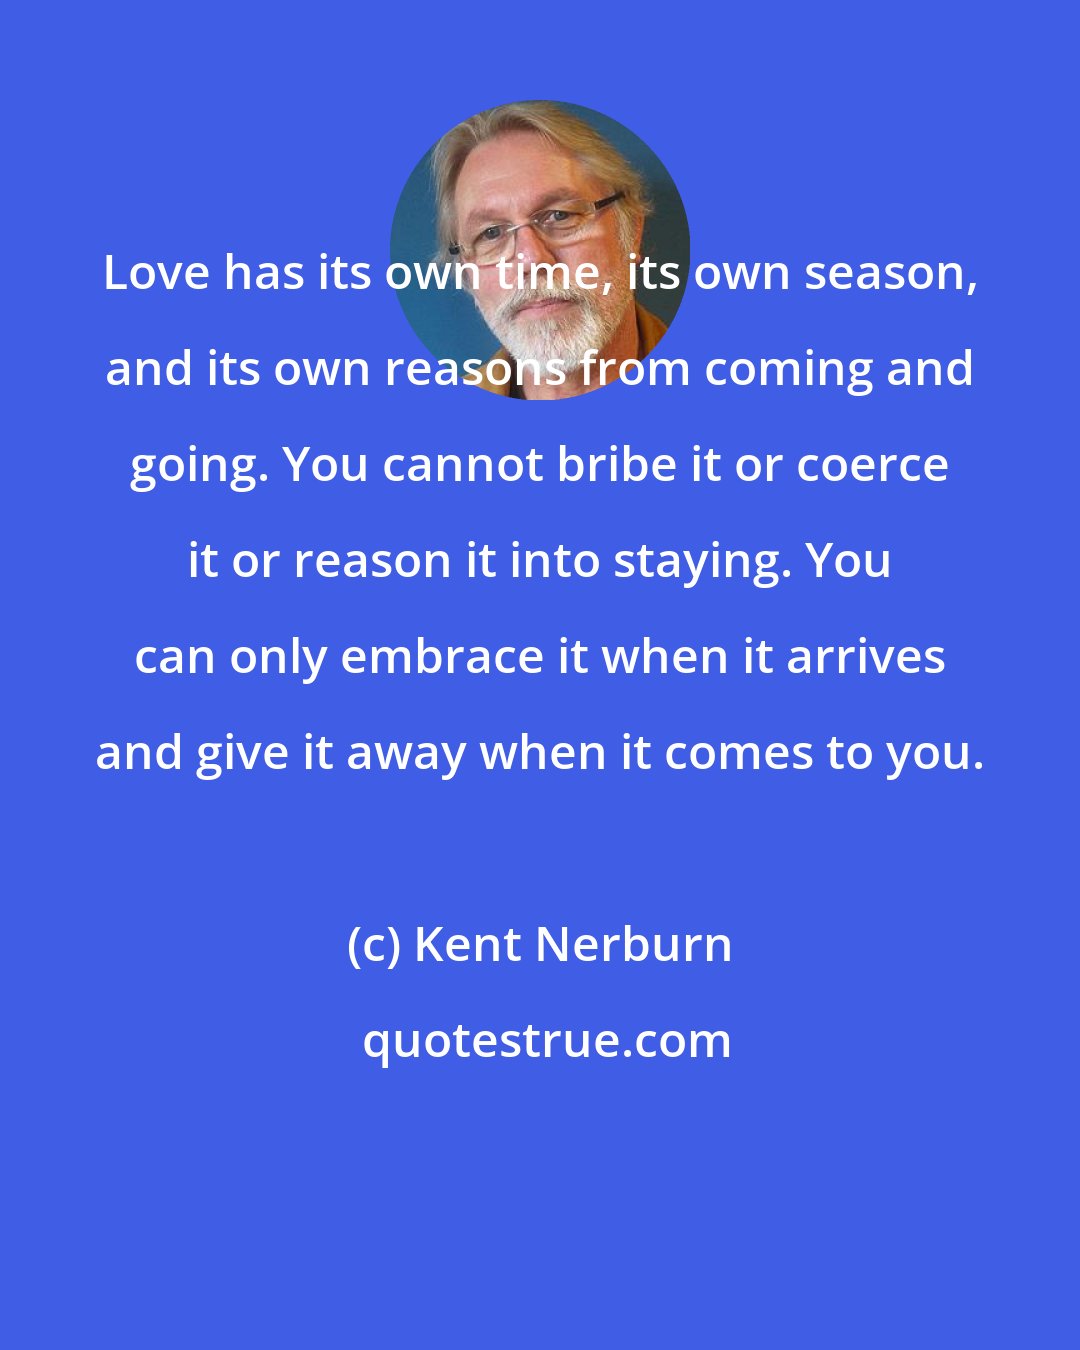 Kent Nerburn: Love has its own time, its own season, and its own reasons from coming and going. You cannot bribe it or coerce it or reason it into staying. You can only embrace it when it arrives and give it away when it comes to you.